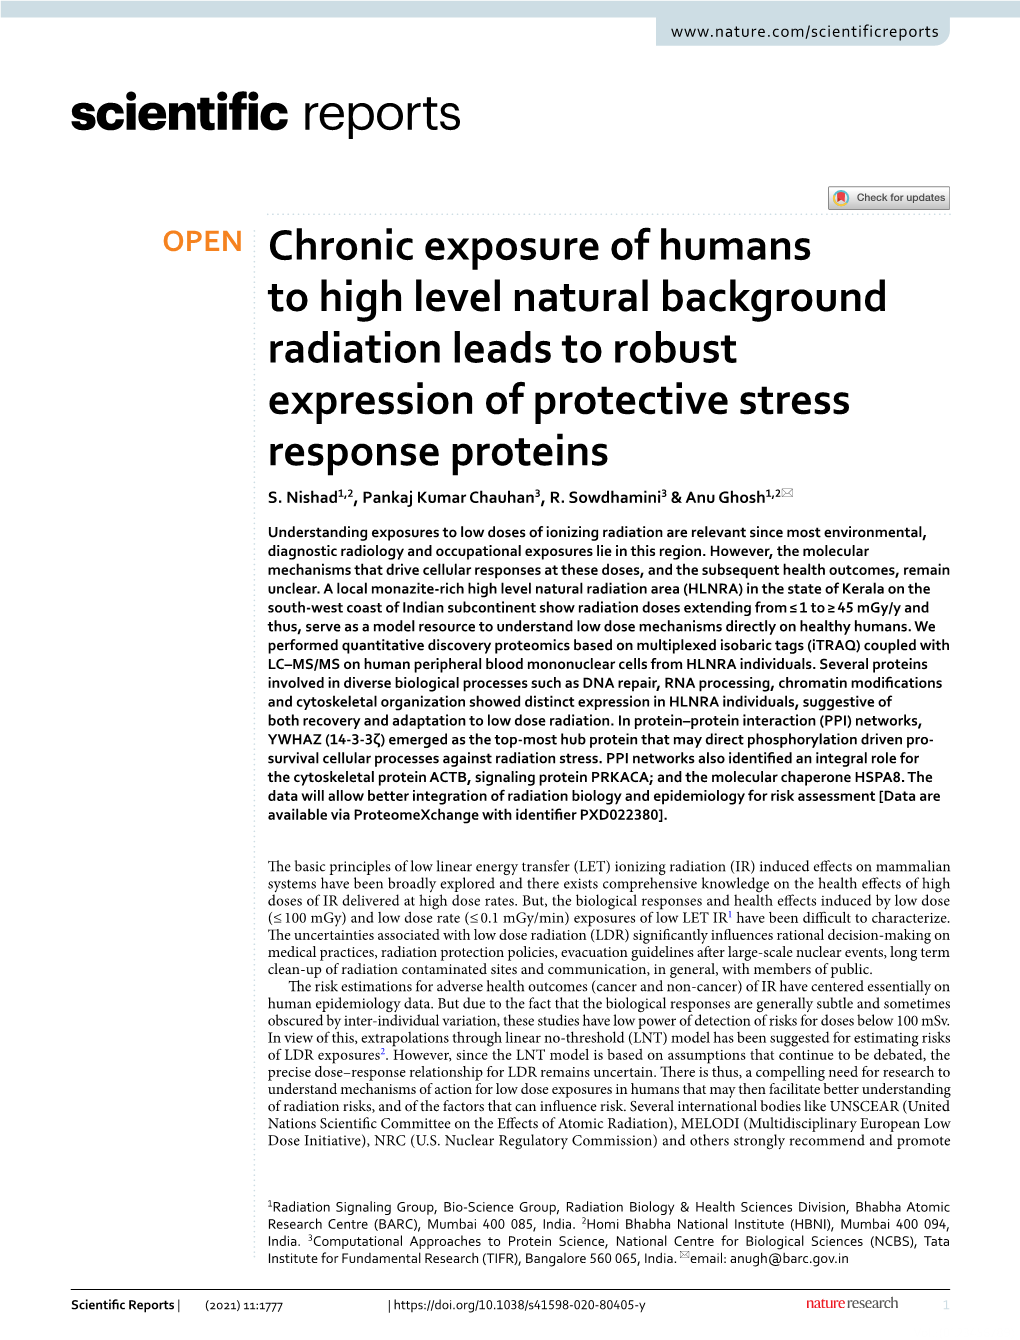 Chronic Exposure of Humans to High Level Natural Background Radiation Leads to Robust Expression of Protective Stress Response Proteins S